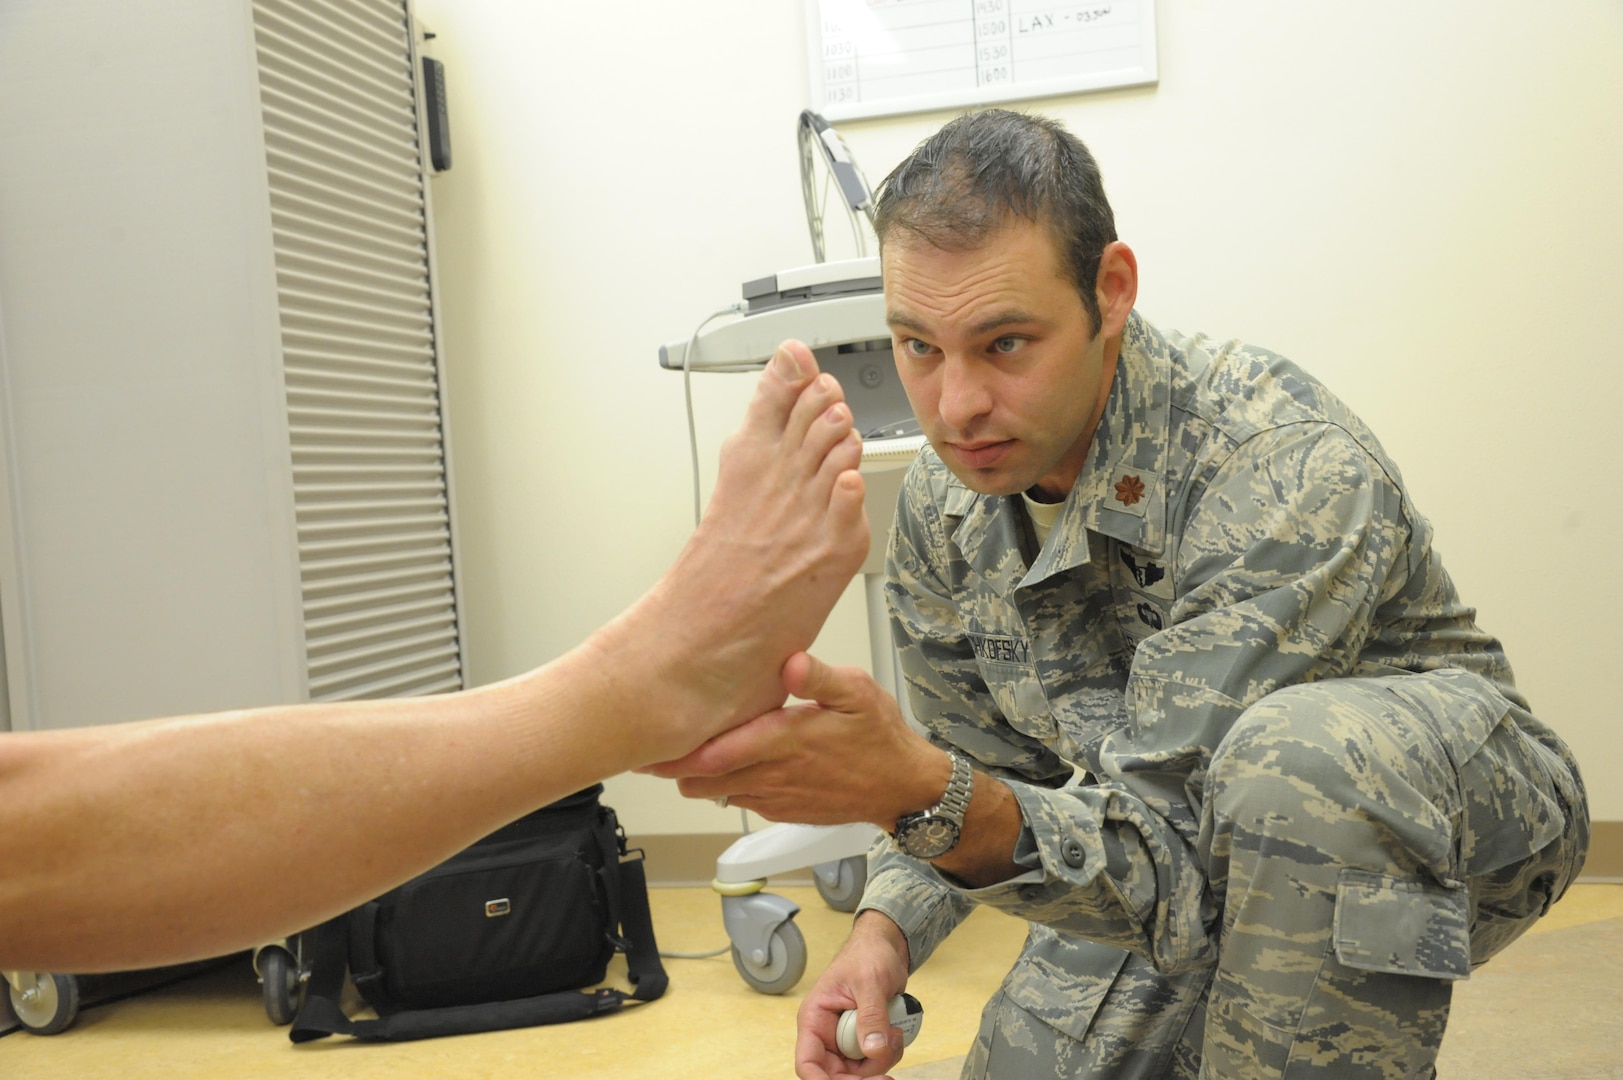 Maj. (Dr.) Thomas Beachkofsky, 59th Medical Specialty Squadron dermatologist, checks a patient for abnormal skin growths Tuesday at the Joint Base San Antonio-Randolph Medical Clinic.The 59th Medical Wing at Joint Base San Antonio-Lackland has expanded dermatology services to the JBSA-Randolph Medical Clinic, Beachkofsky, started seeing patients May 17 at the 359th Medical Group facility on Third Street West.

